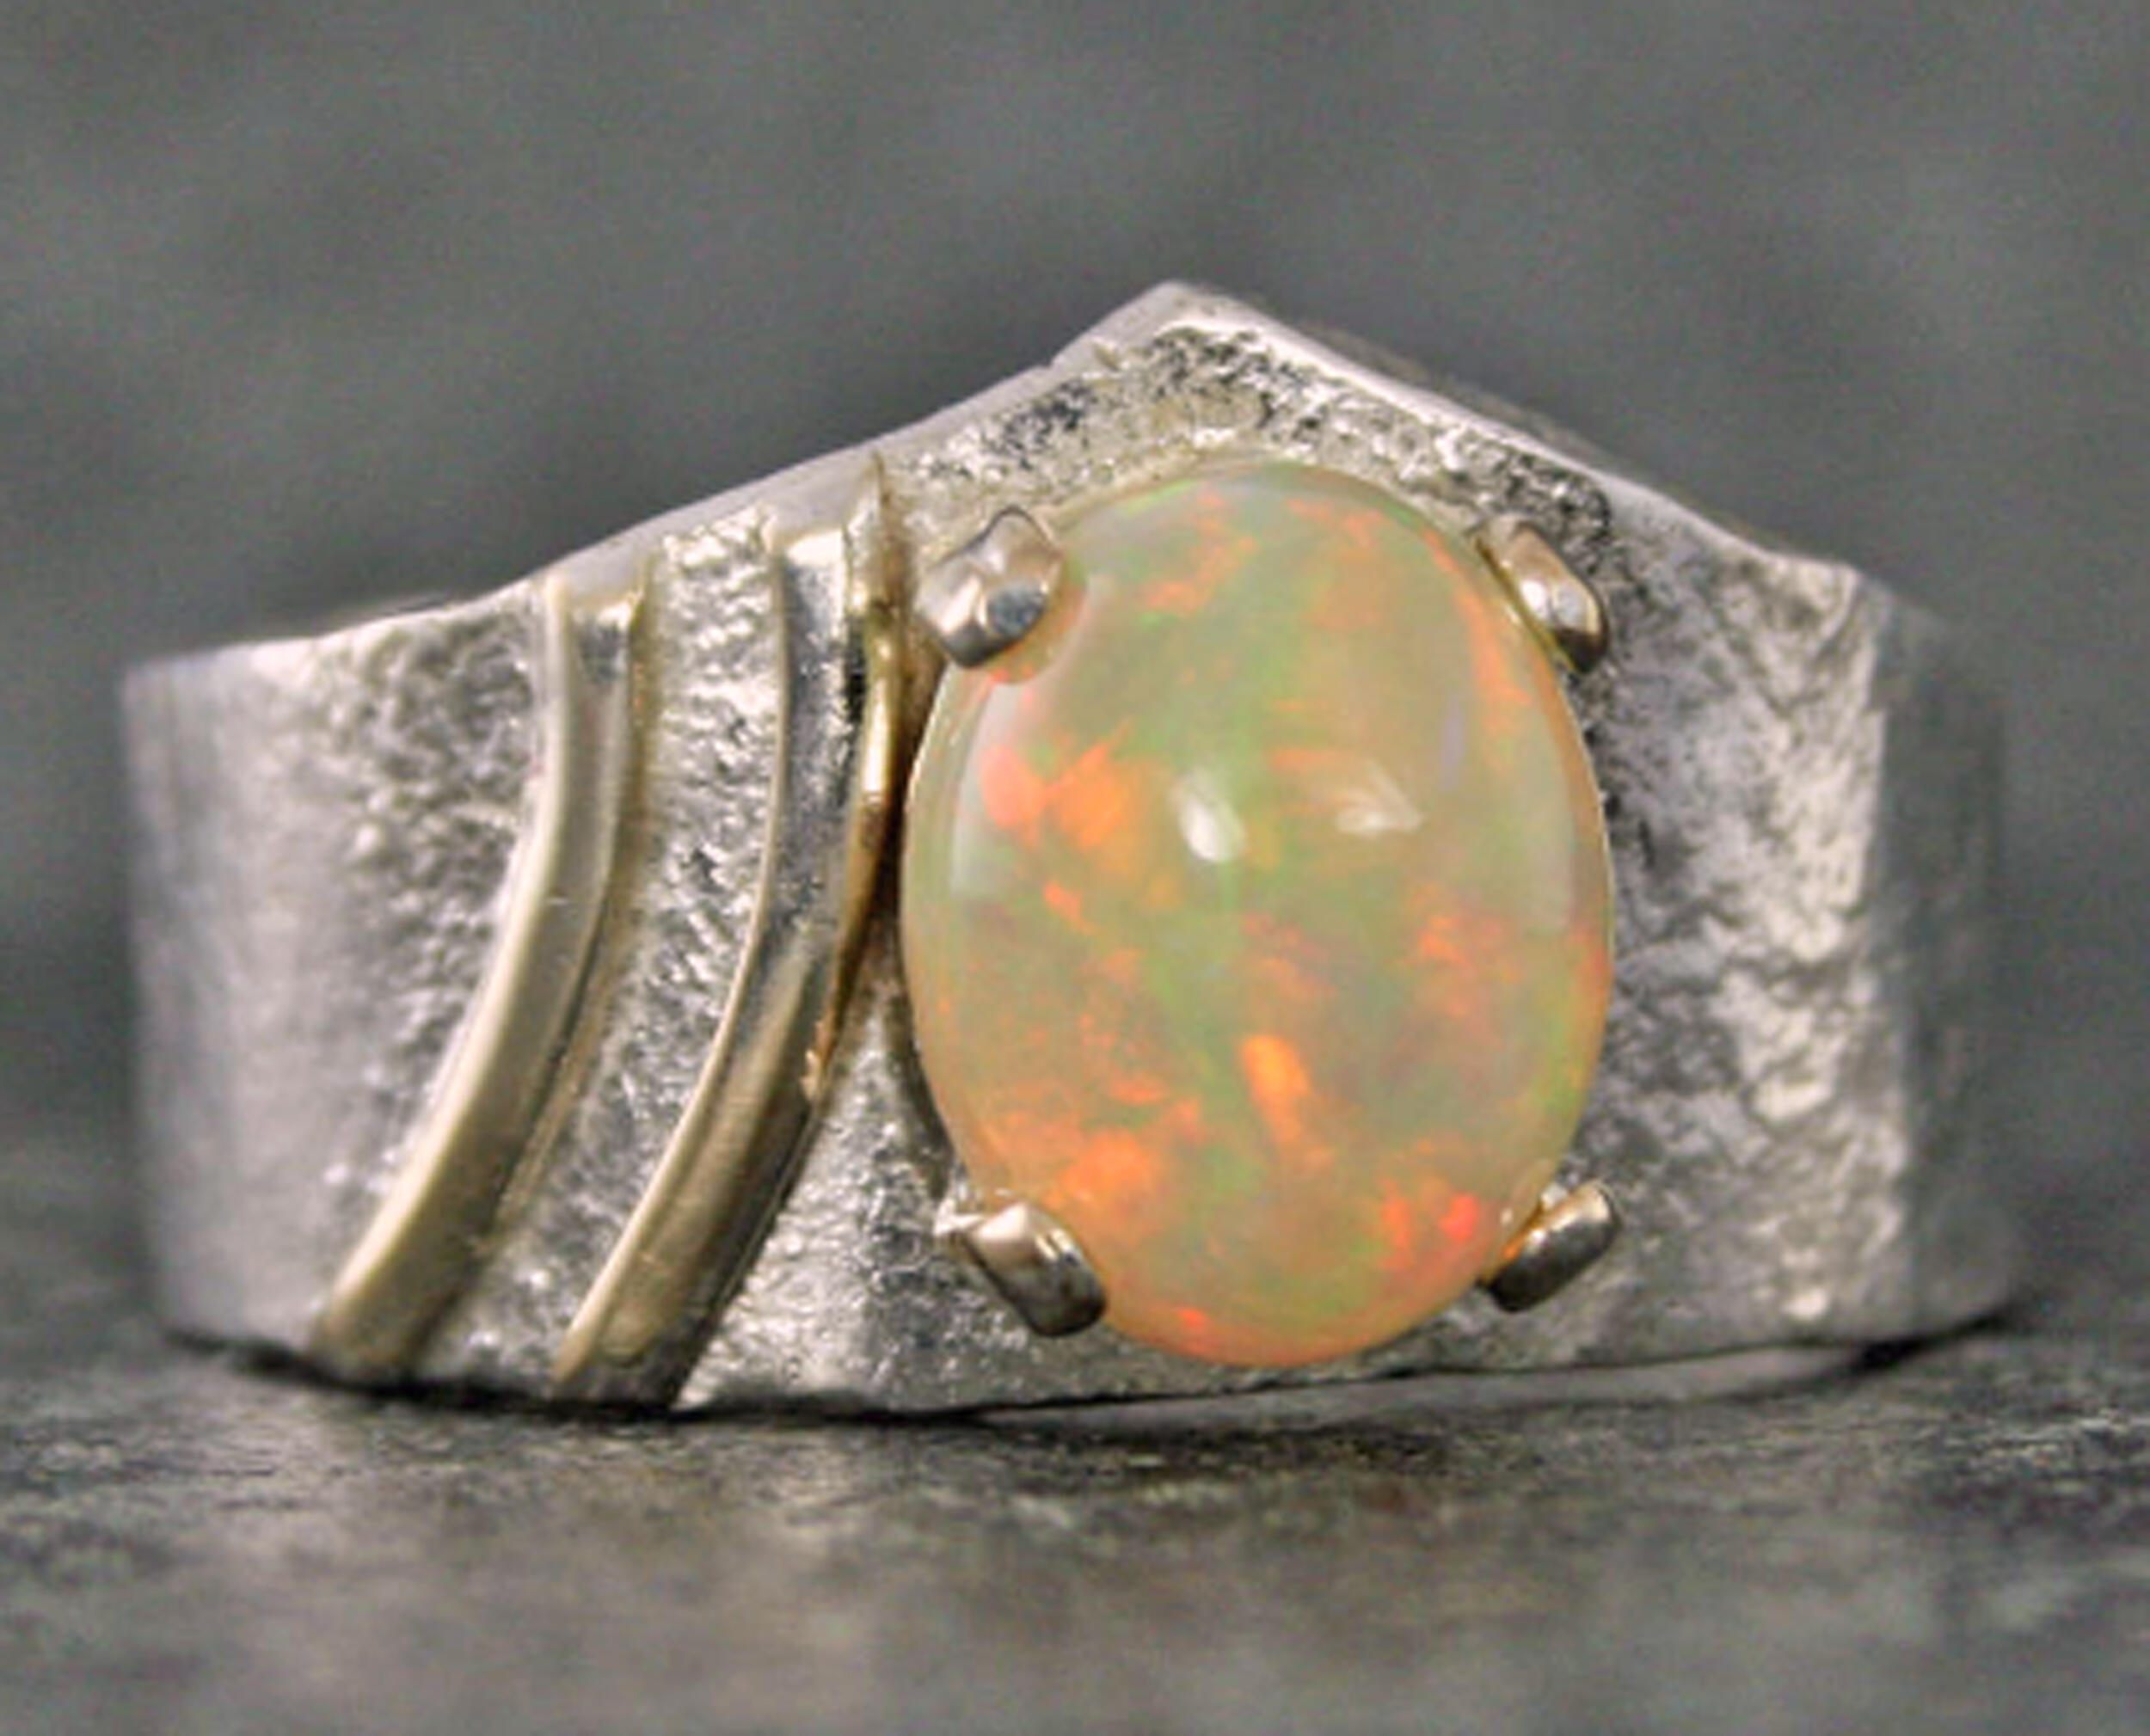 Buy Raw Orange Fire Opal Ring, Orange Opal With CZ Ring, Uncut Opal Rough,  October Birthstone, Handmade Ring, Birthday Gift, Raw Opal Jewelry Online  in India - Etsy